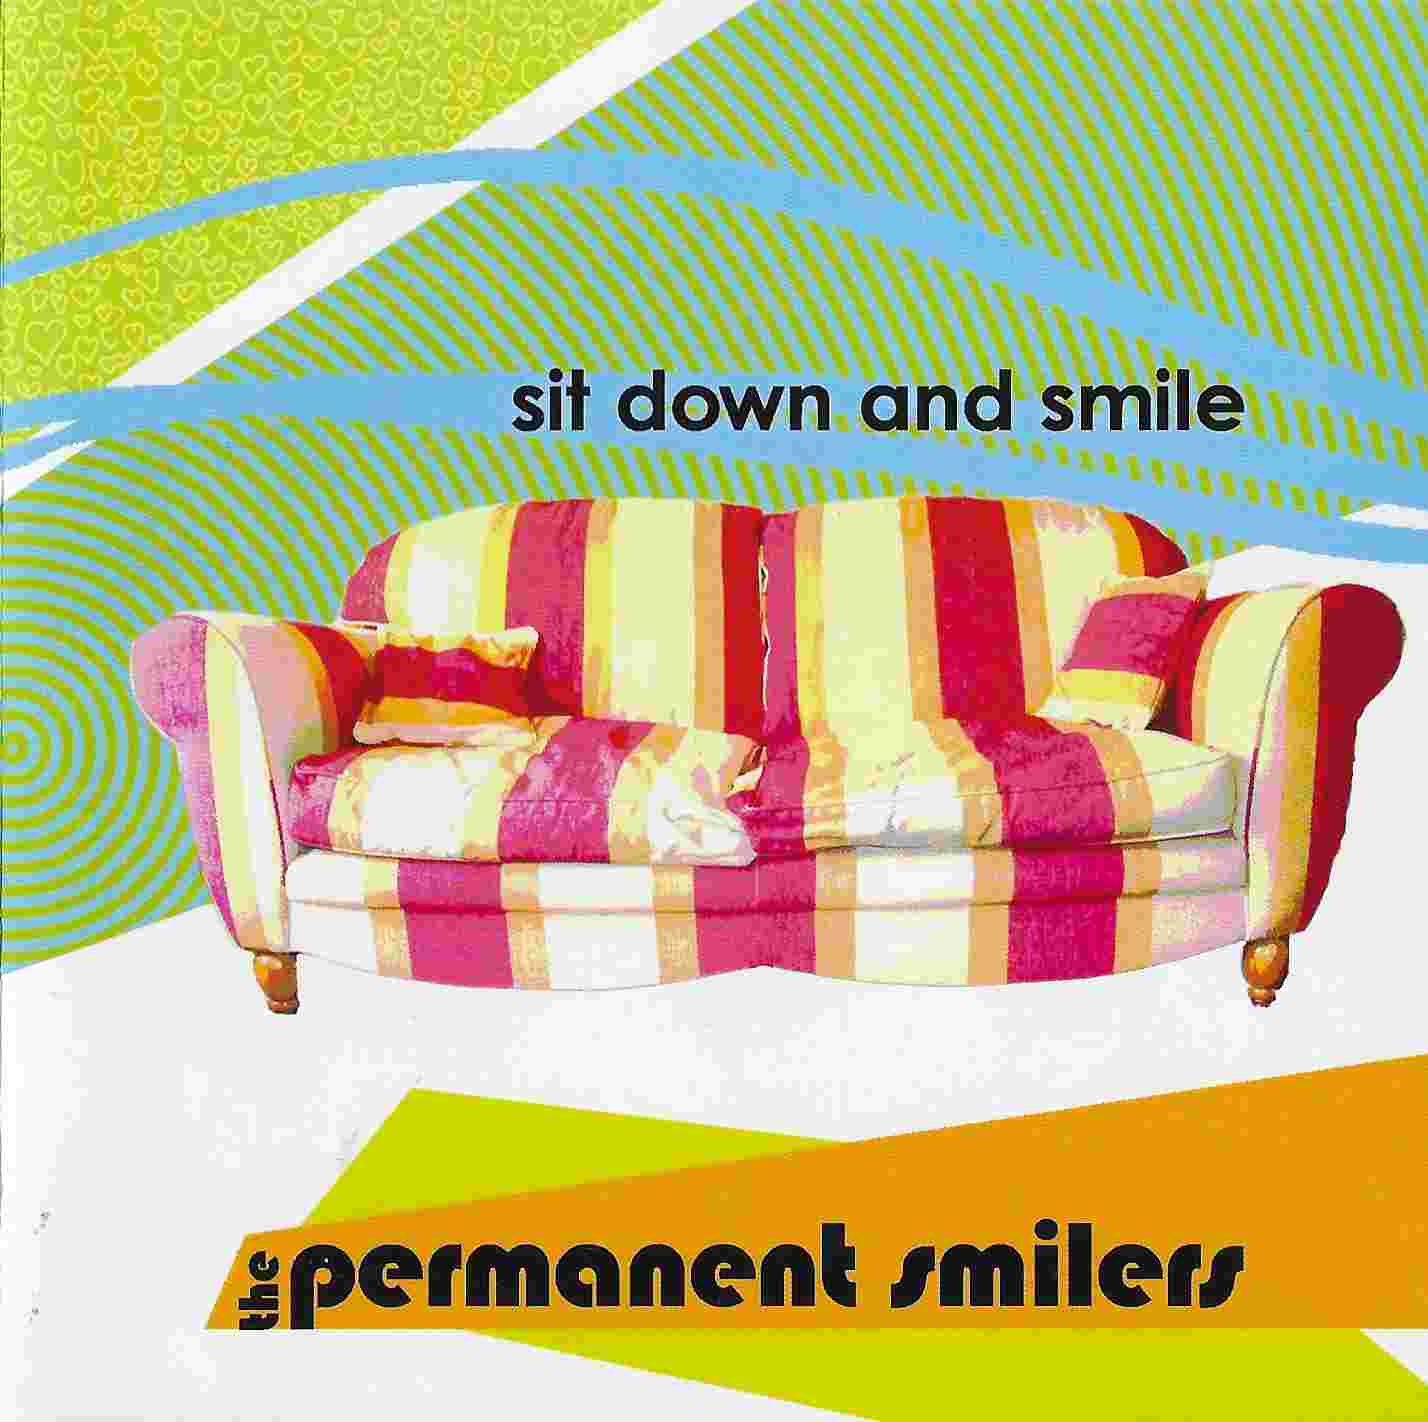 Picture of CITRIC 3 Sit down and smile by artist The Permanent Smilers